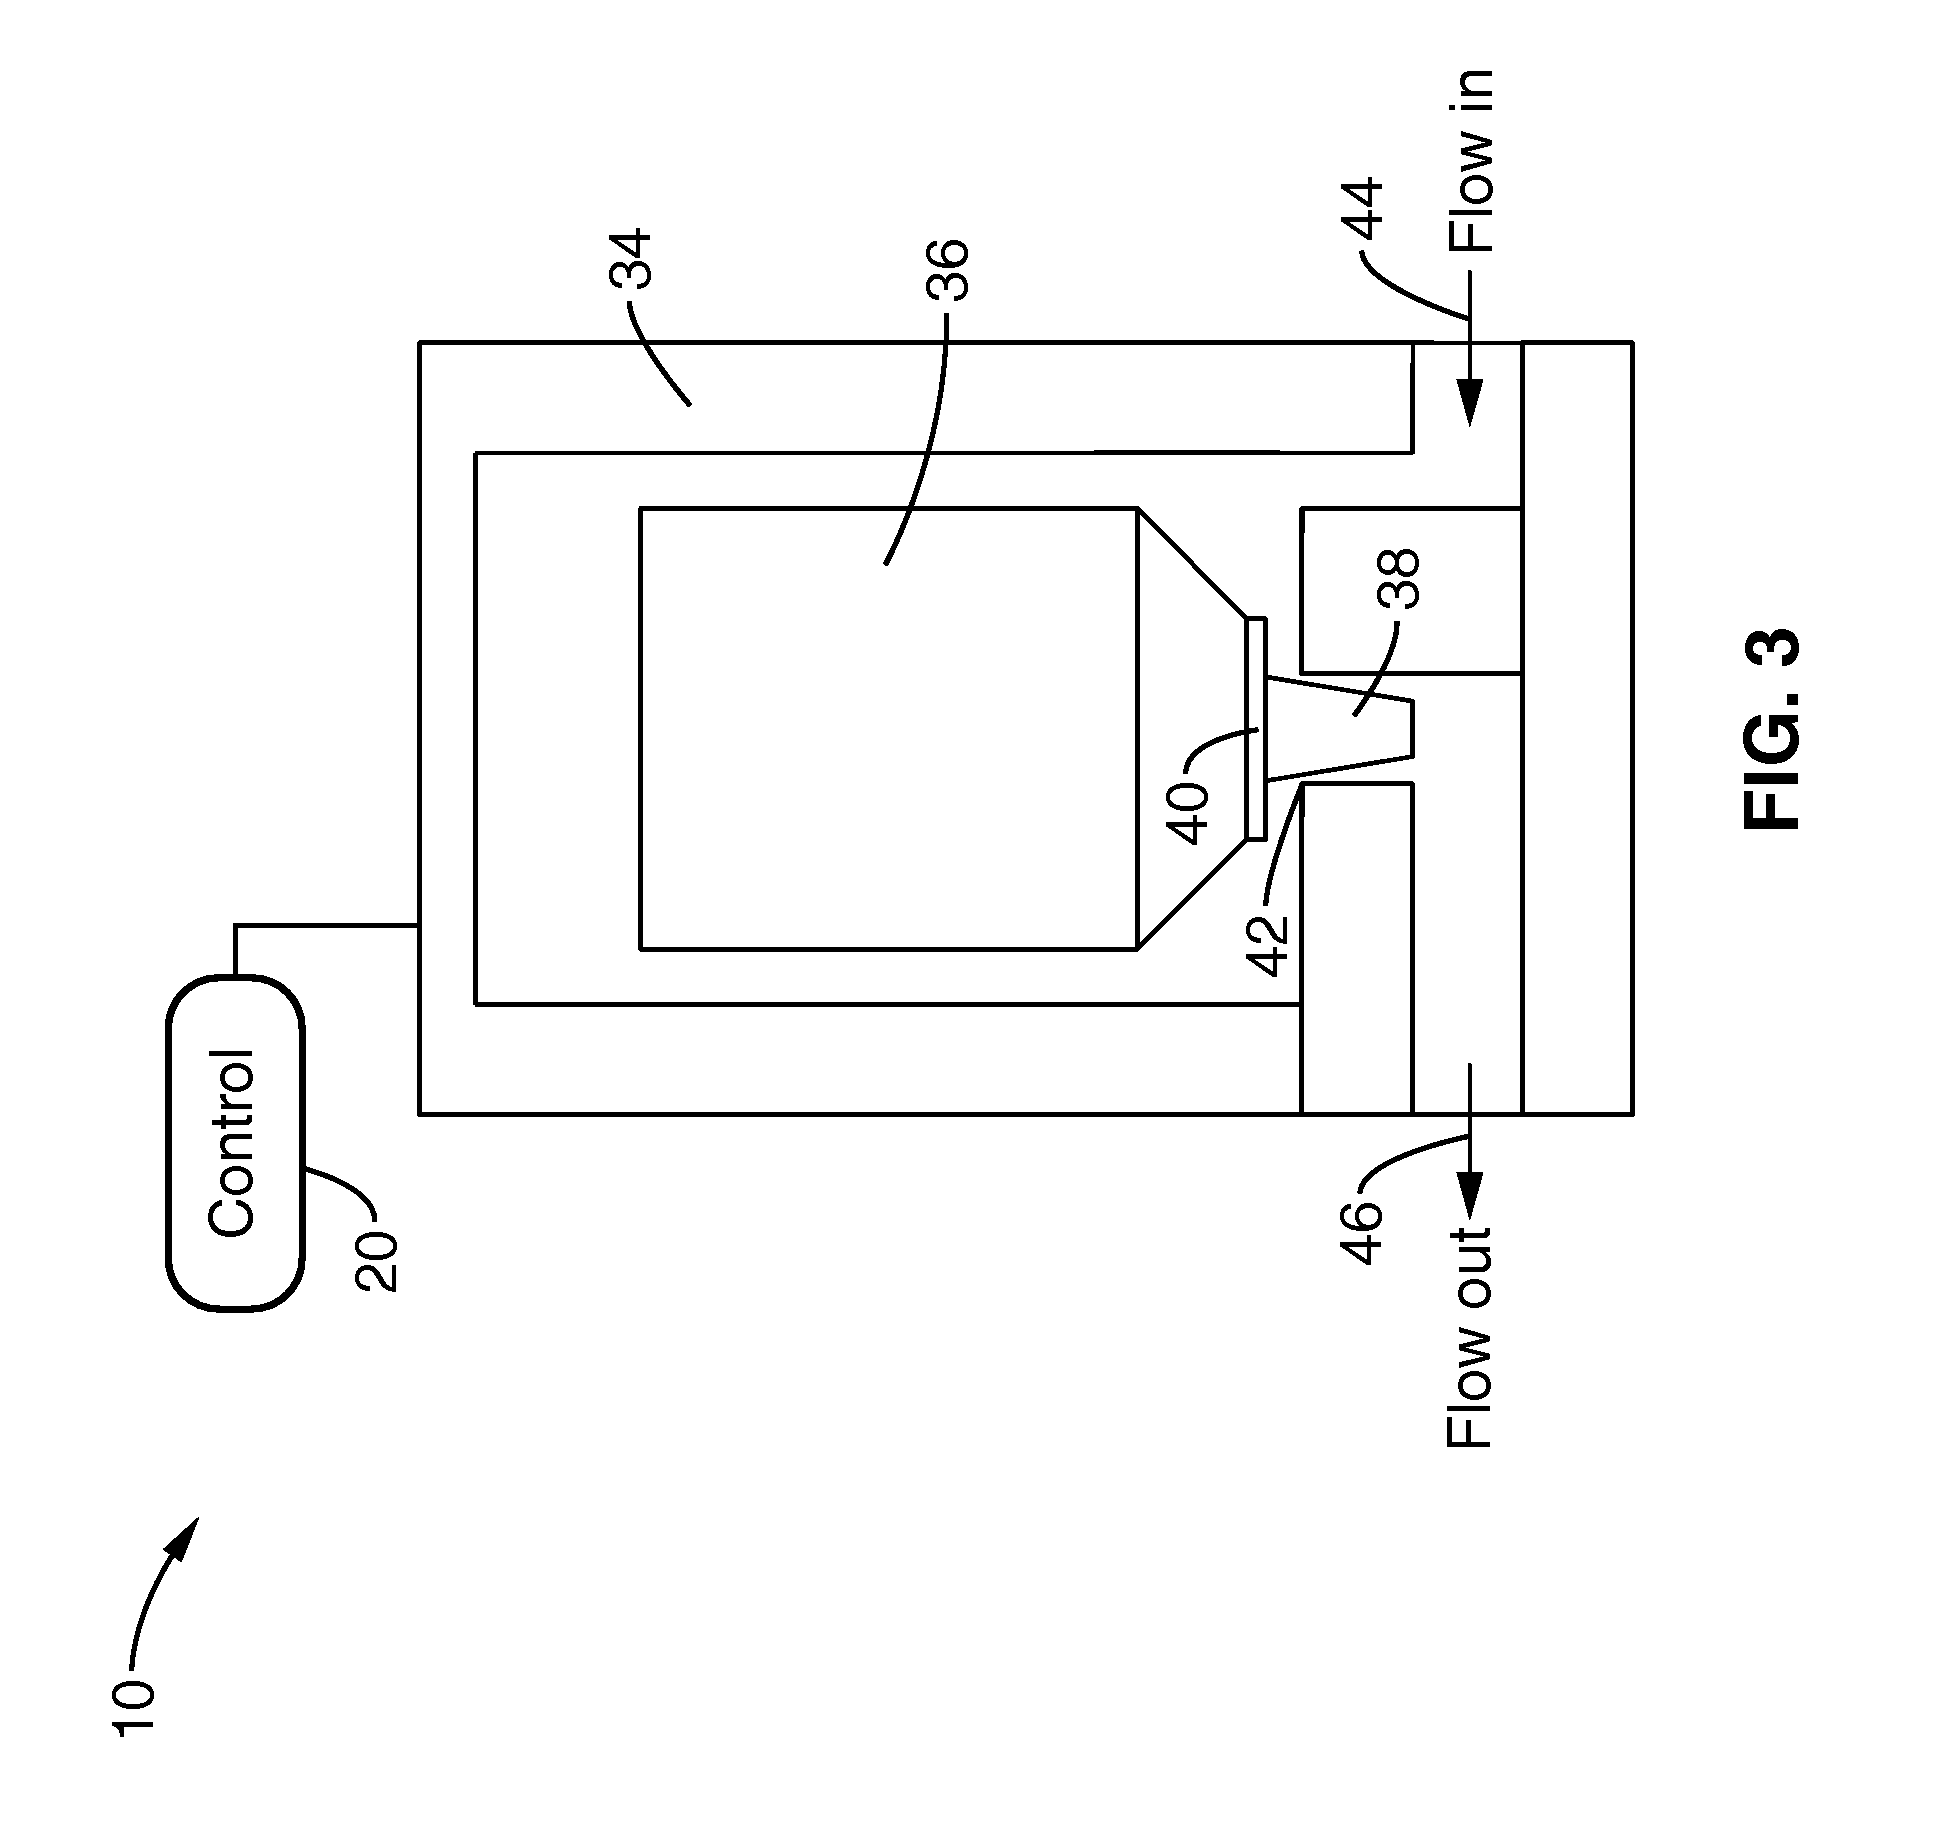 Electronic actuator for simultaneous liquid flowrate and pressure control of sprayers